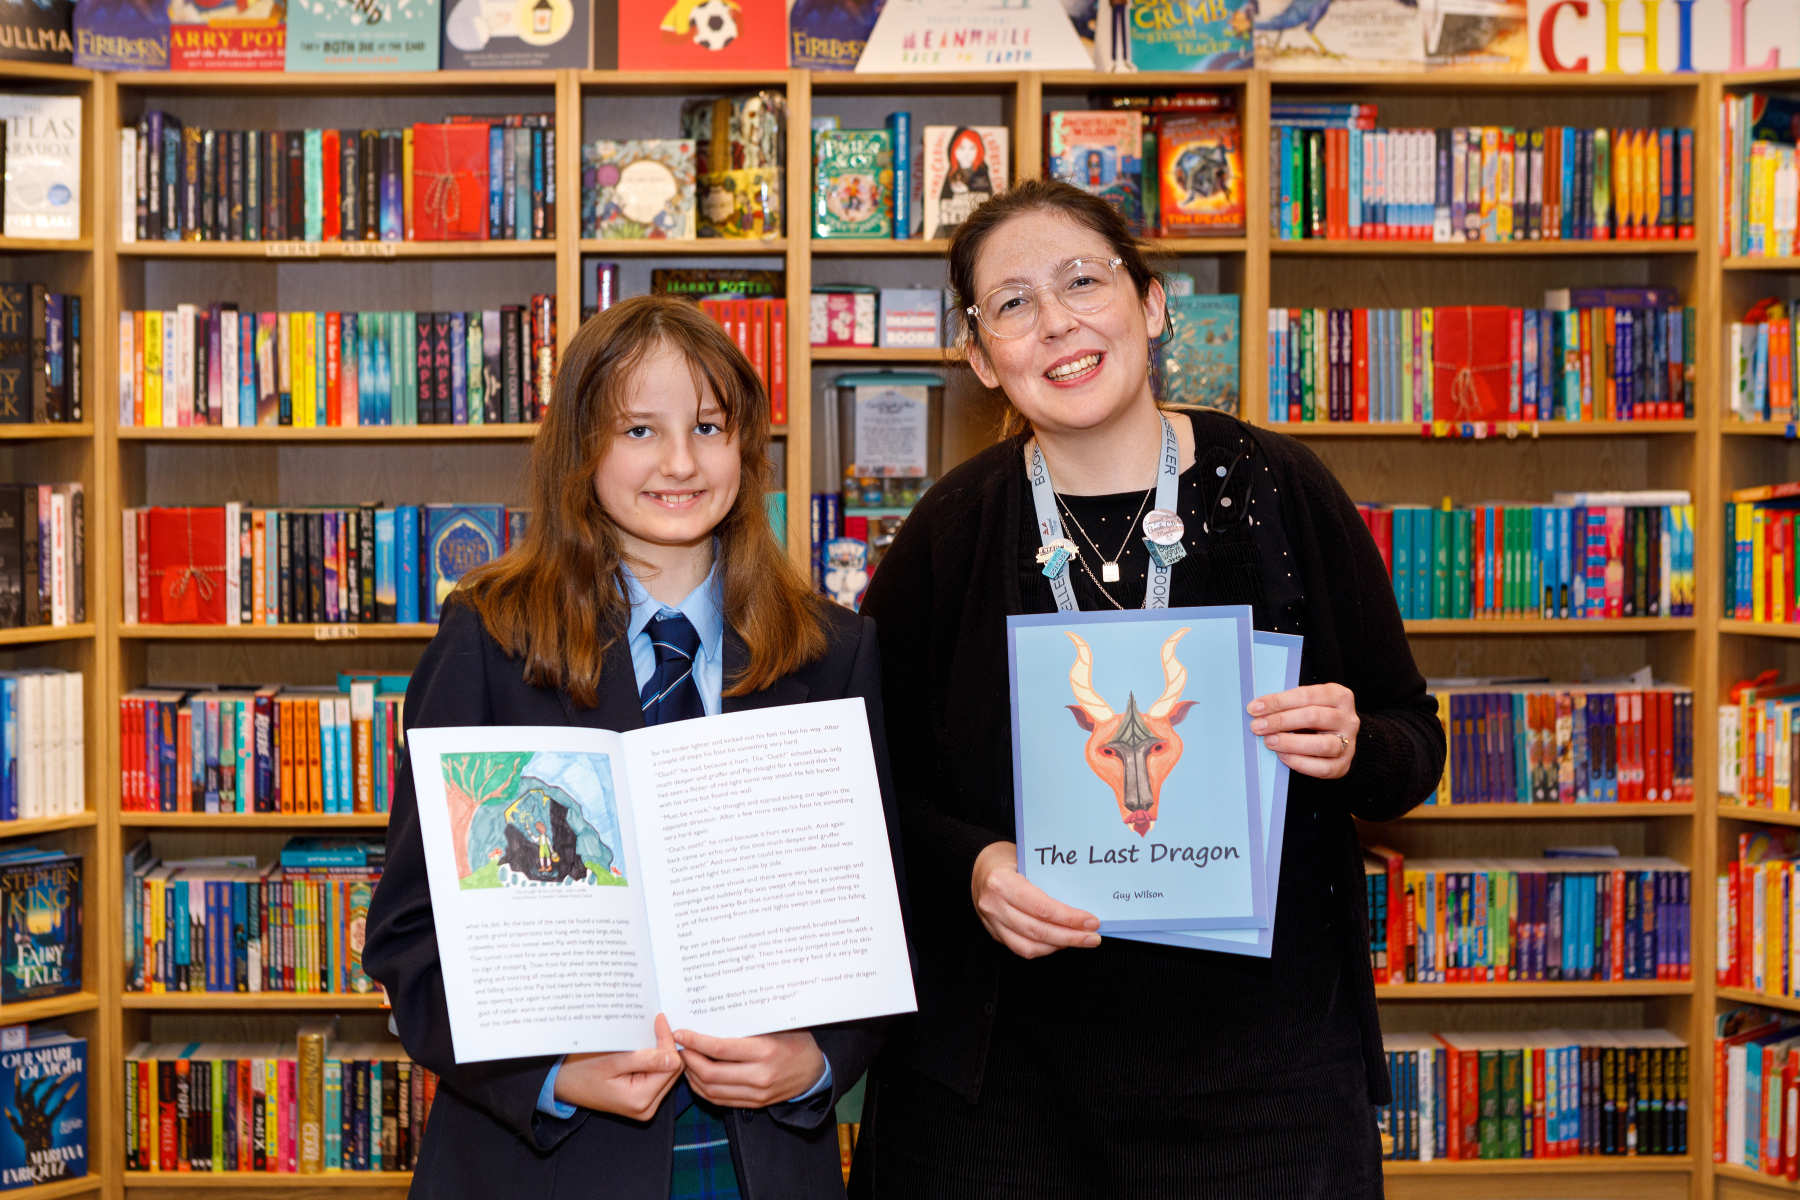 Nadia and Georgina Eckert, owner of Imagined Things Bookshop, with the newly-published book The Last Dragon